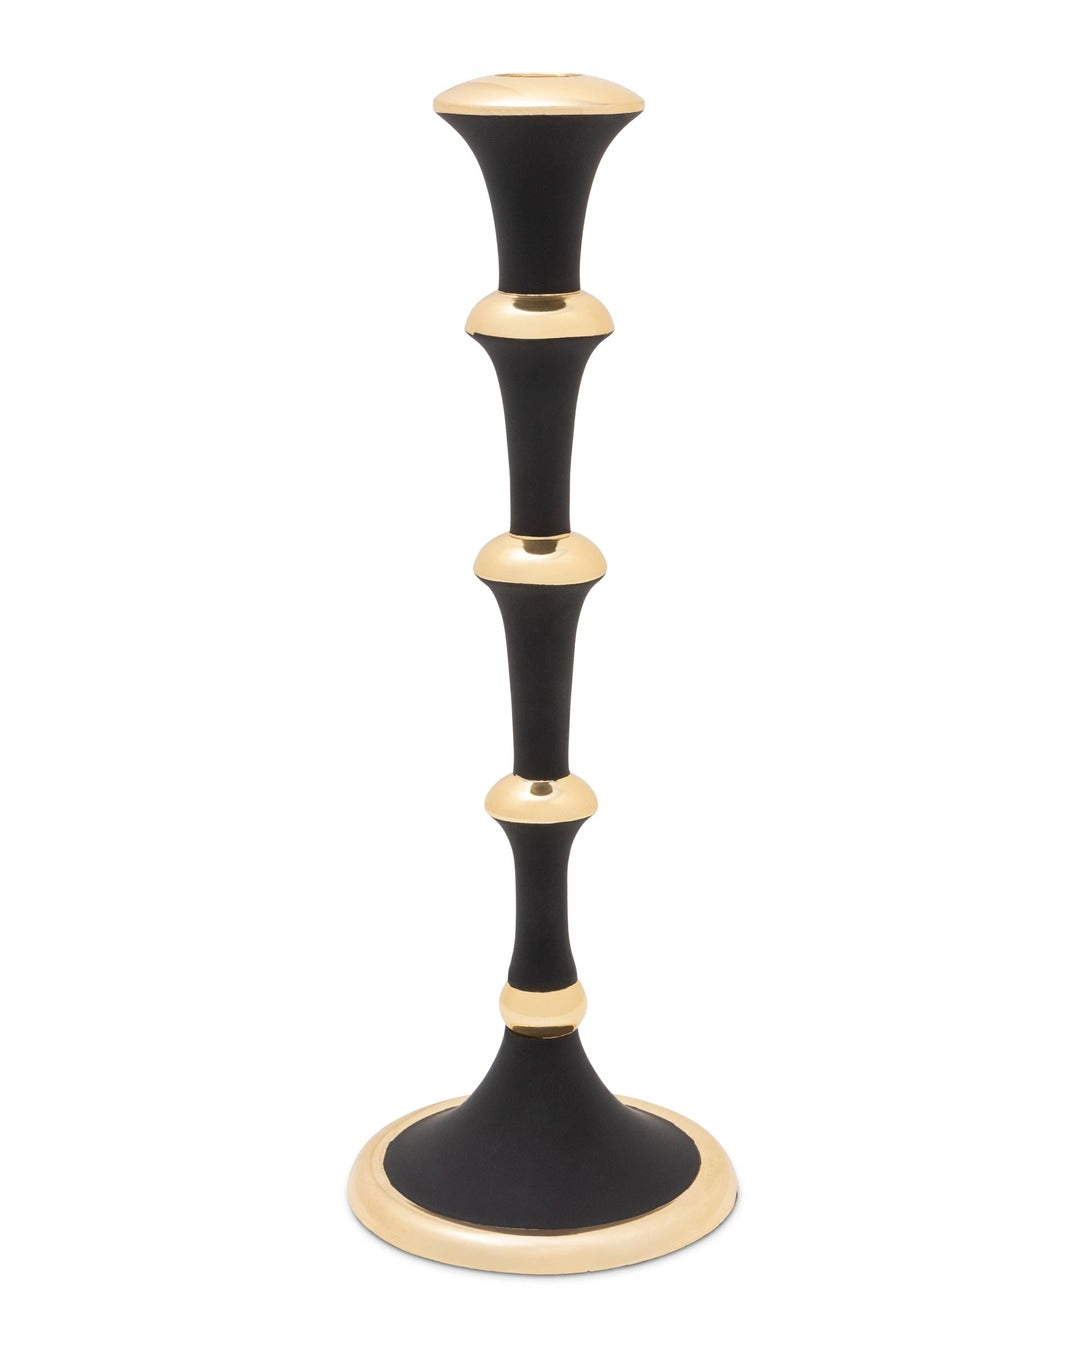 12.25" Black and Gold Candlestick